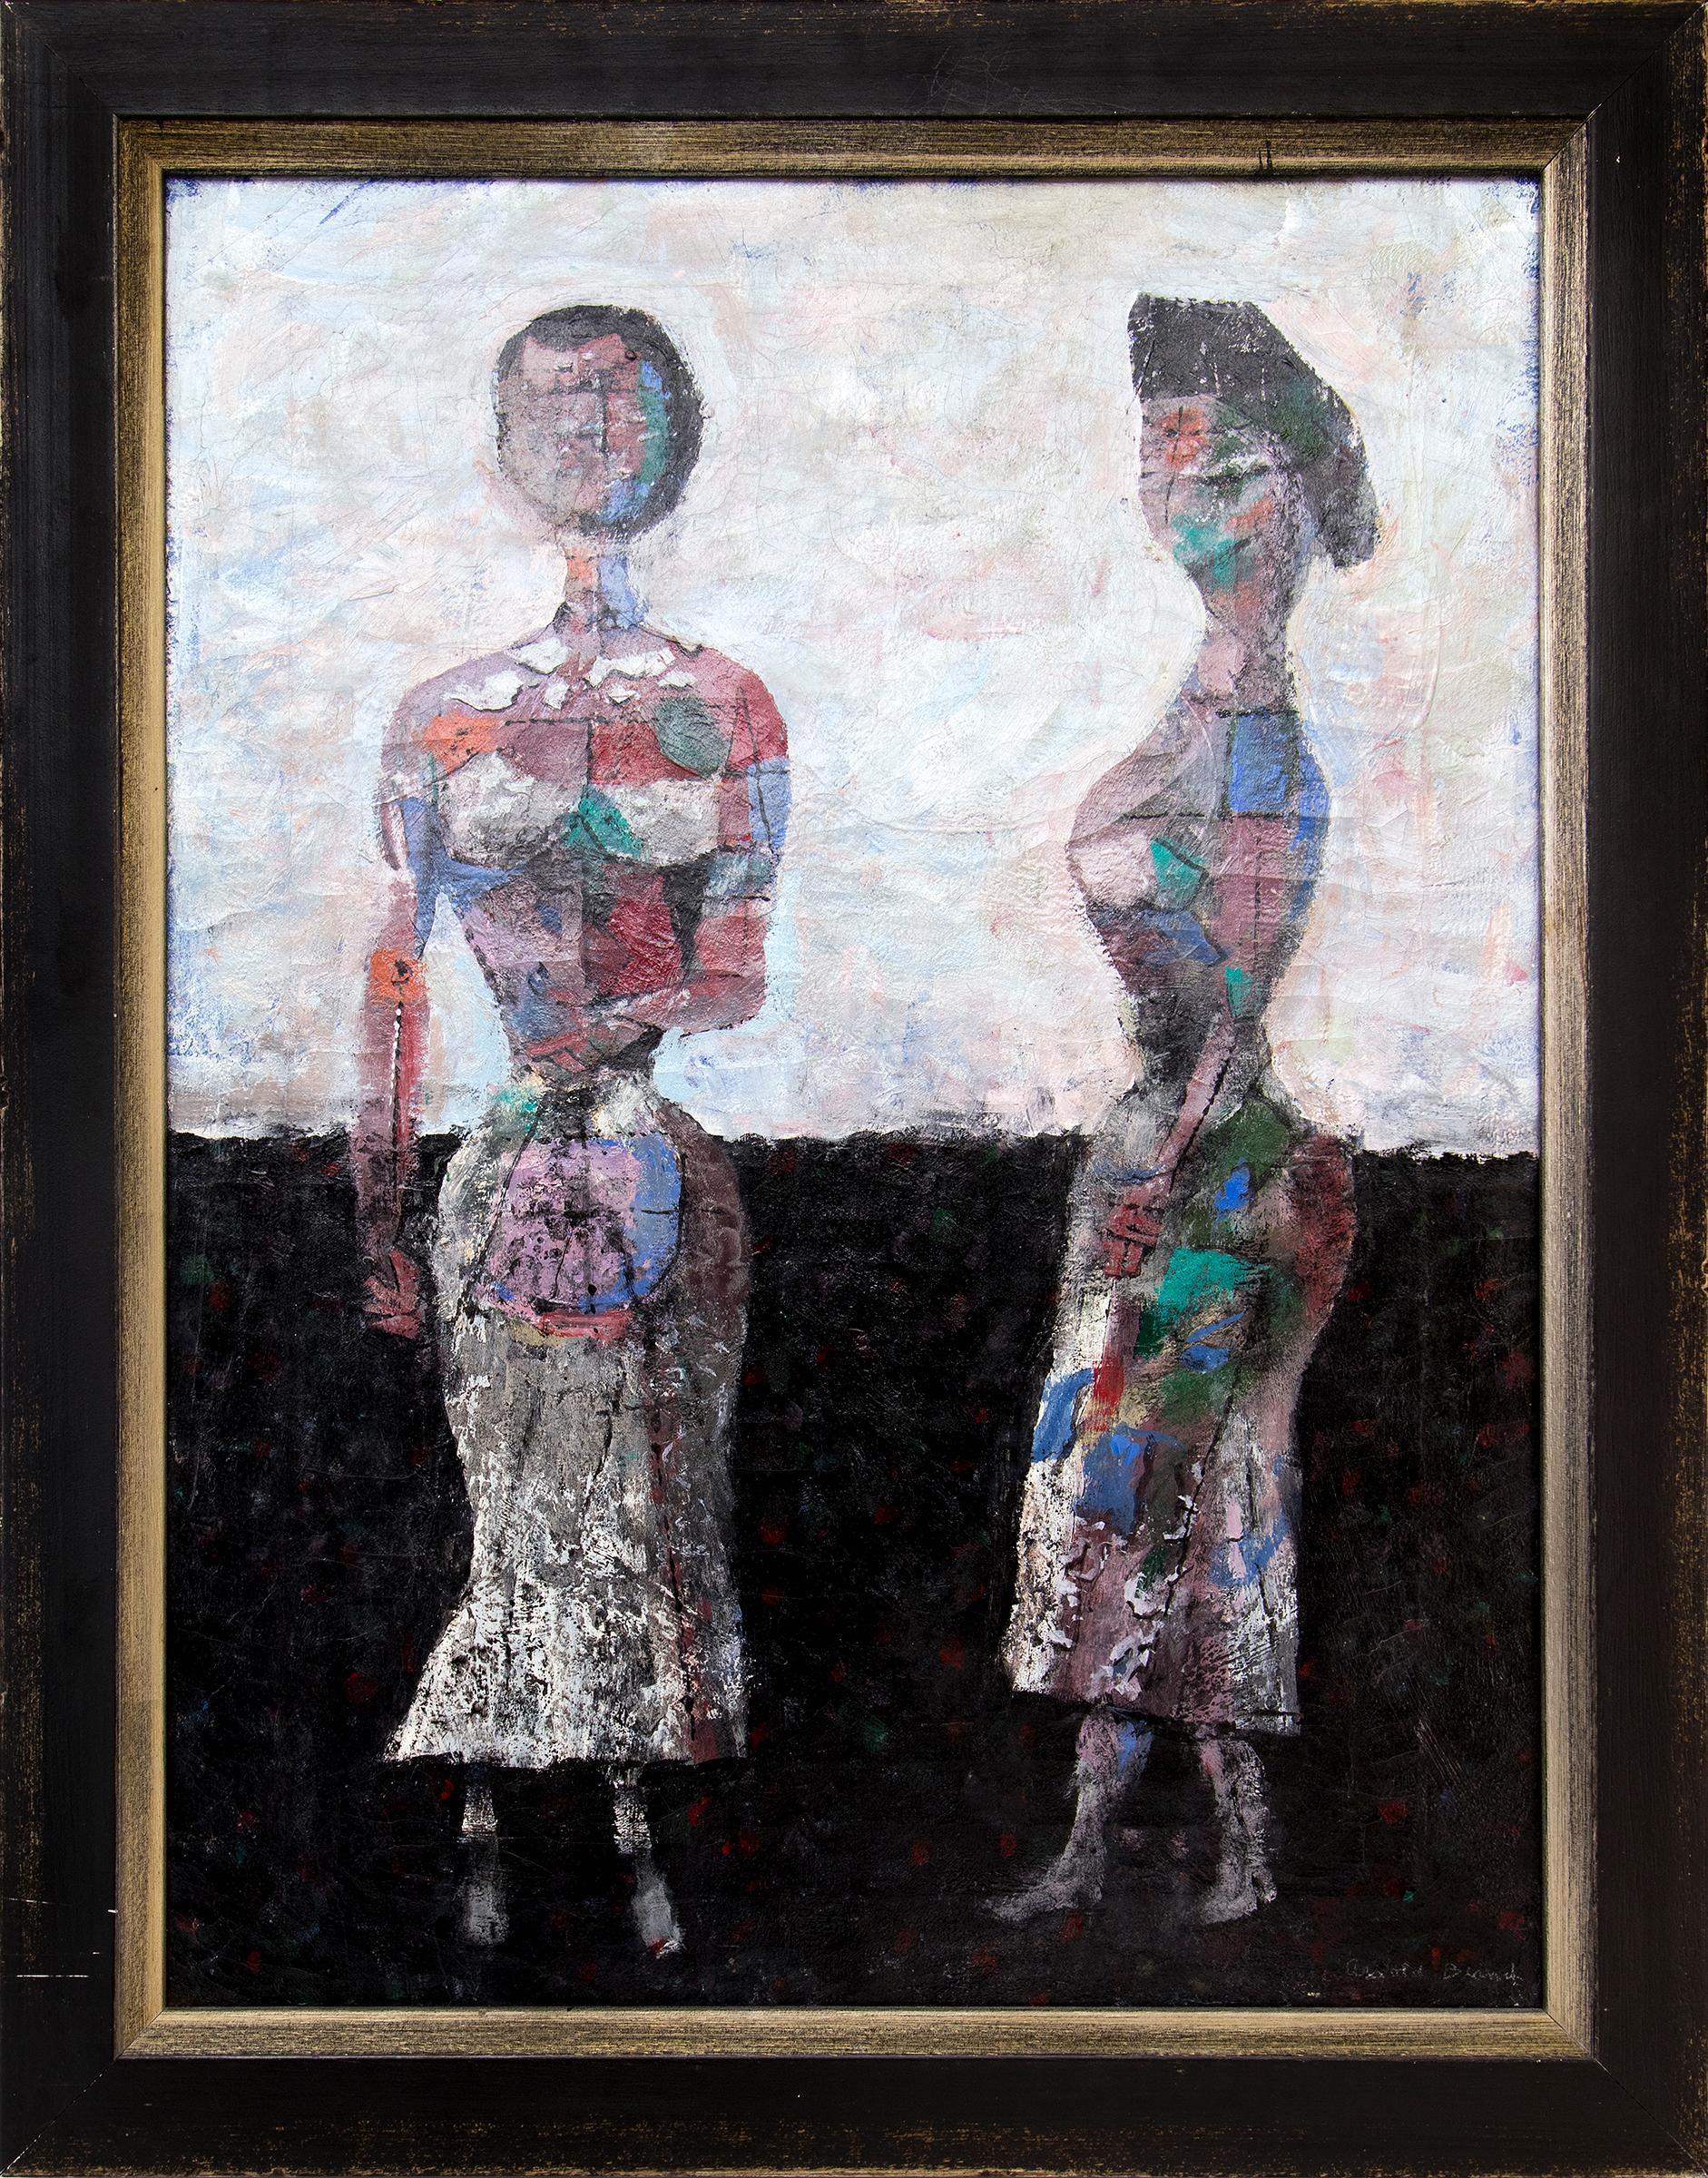 Arnold Blanch Figurative Painting - 1950s Modernist Geometric Abstract Figurative Oil Painting, Female Figures